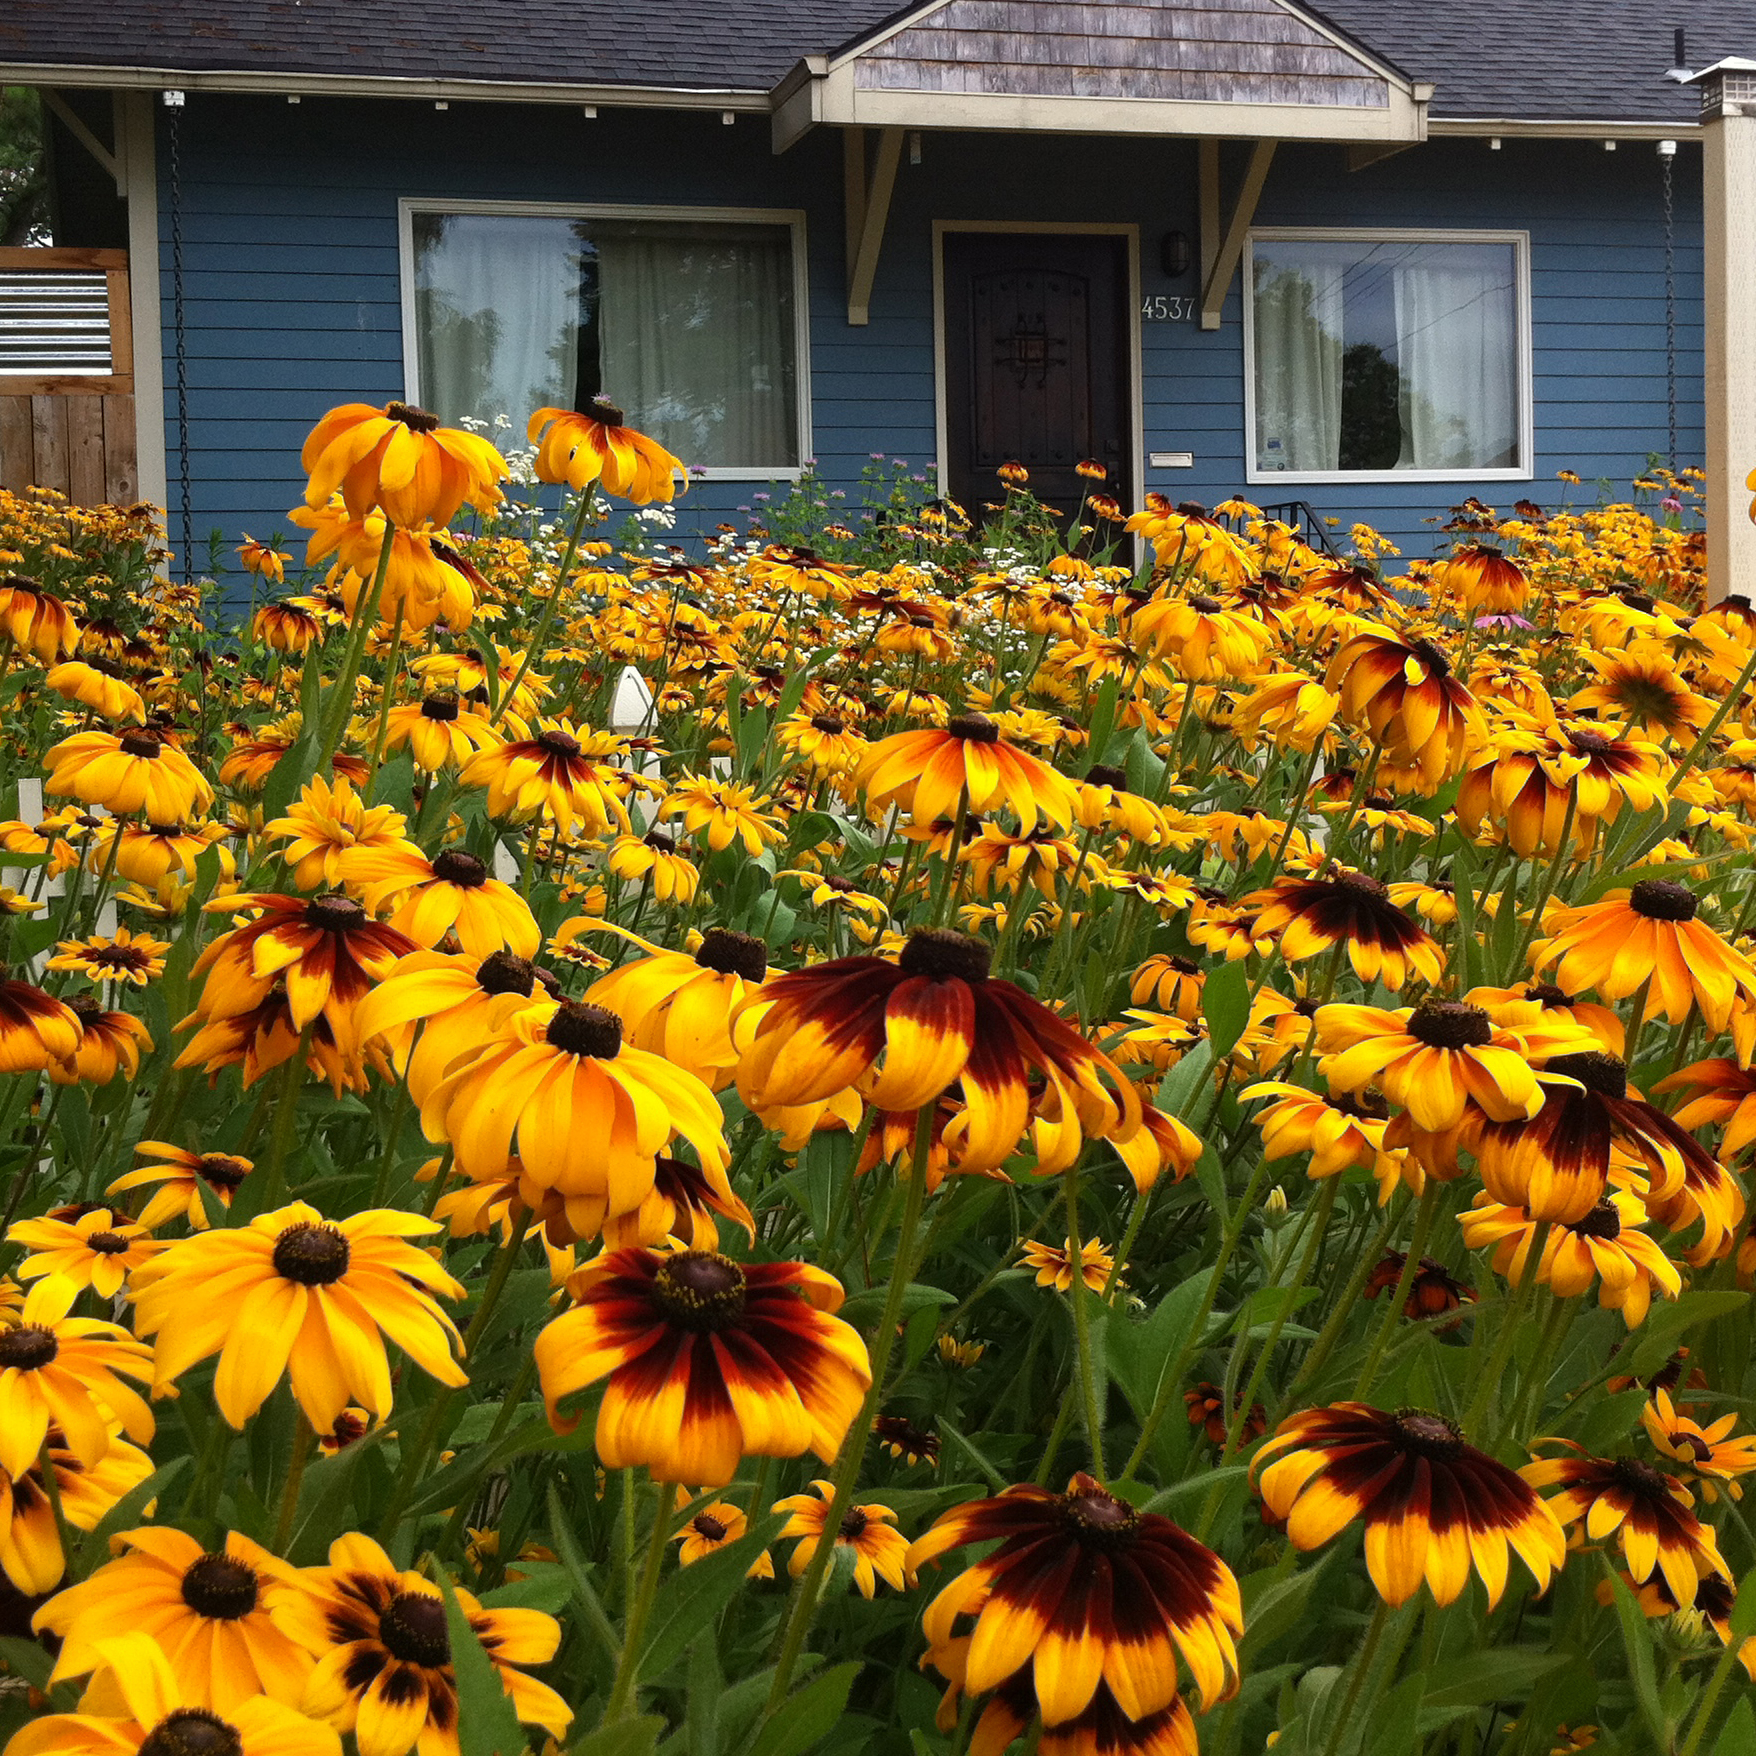 A yard is overrun in the best possible way, with an abundance of bright yellow flowers!